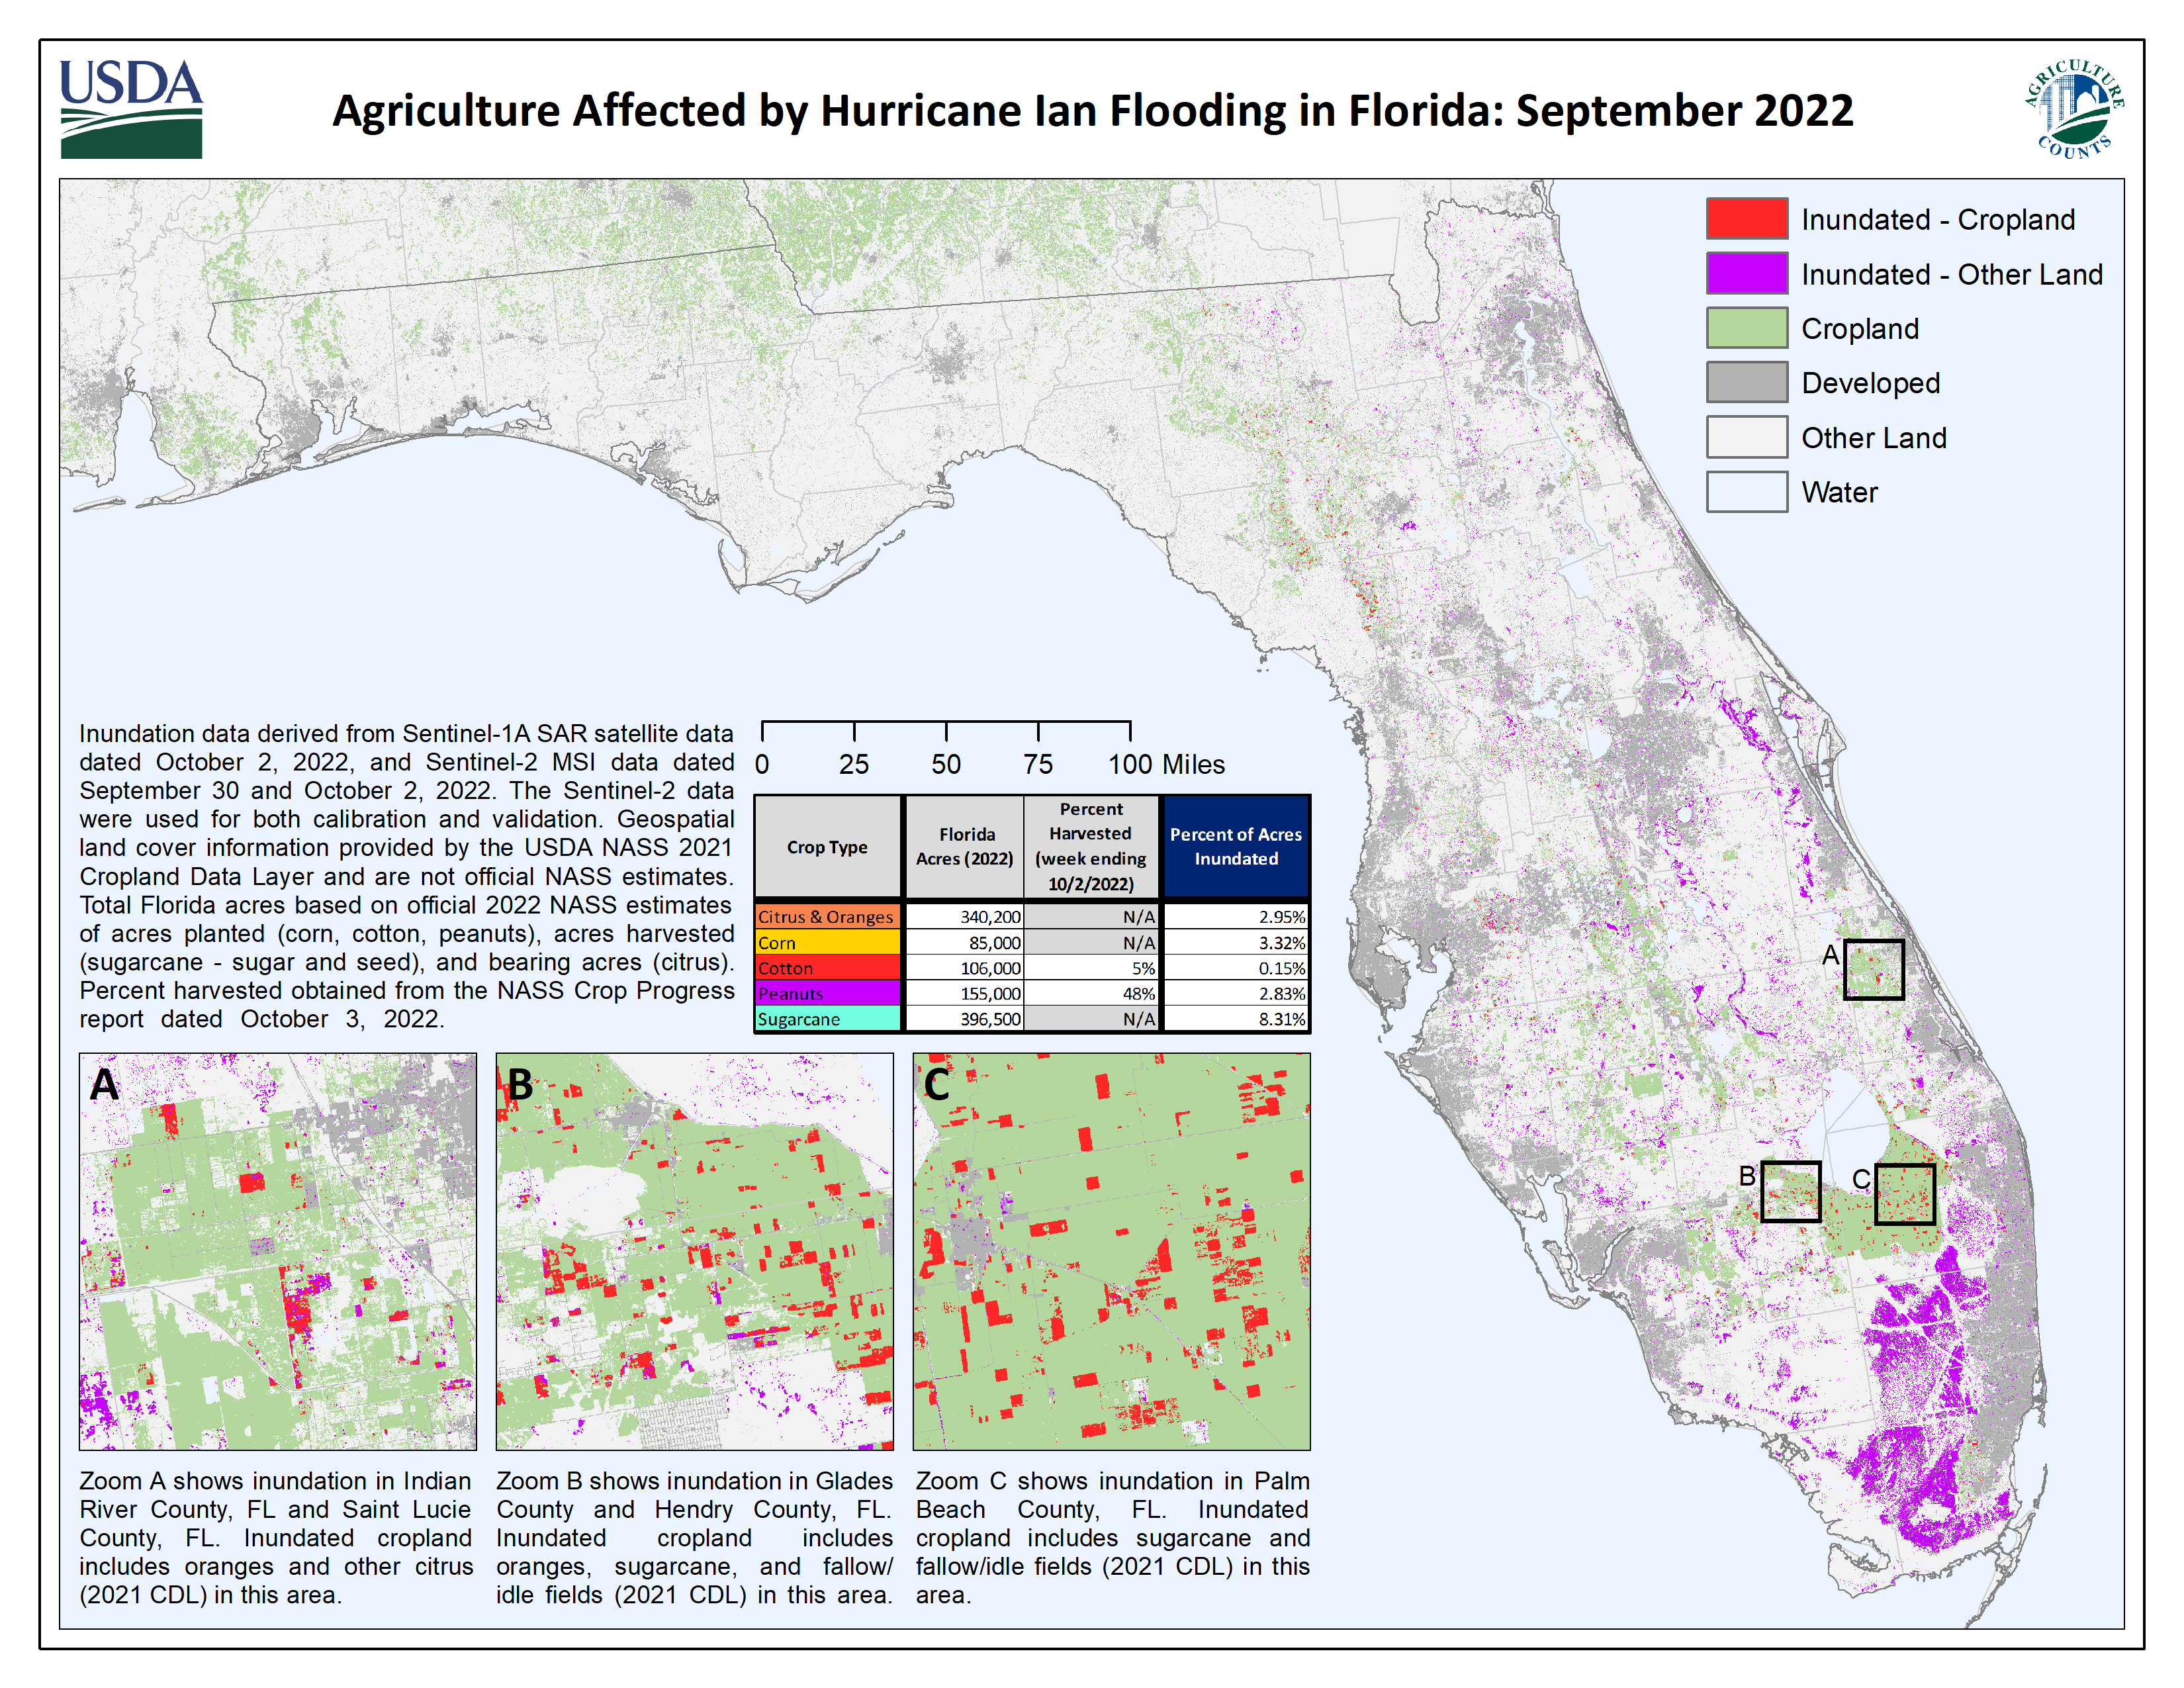 Map created by NASS’s Disaster Mapping Team showing affected agricultural area because of Hurricane Ian flooding in September 2022.